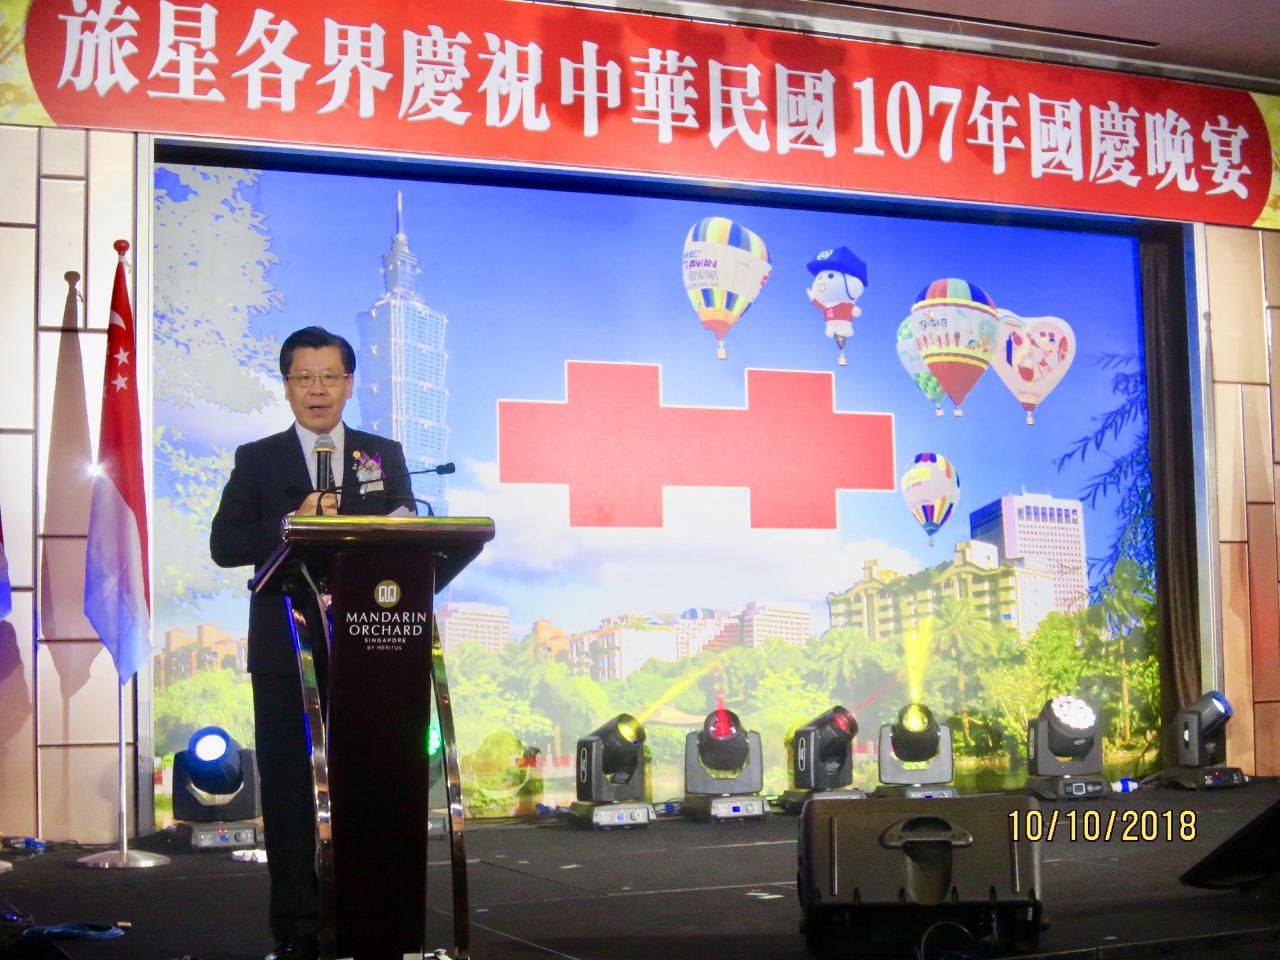 Representative Francis Liang delivering his address at the ROC 107th Double Tenth National Day.